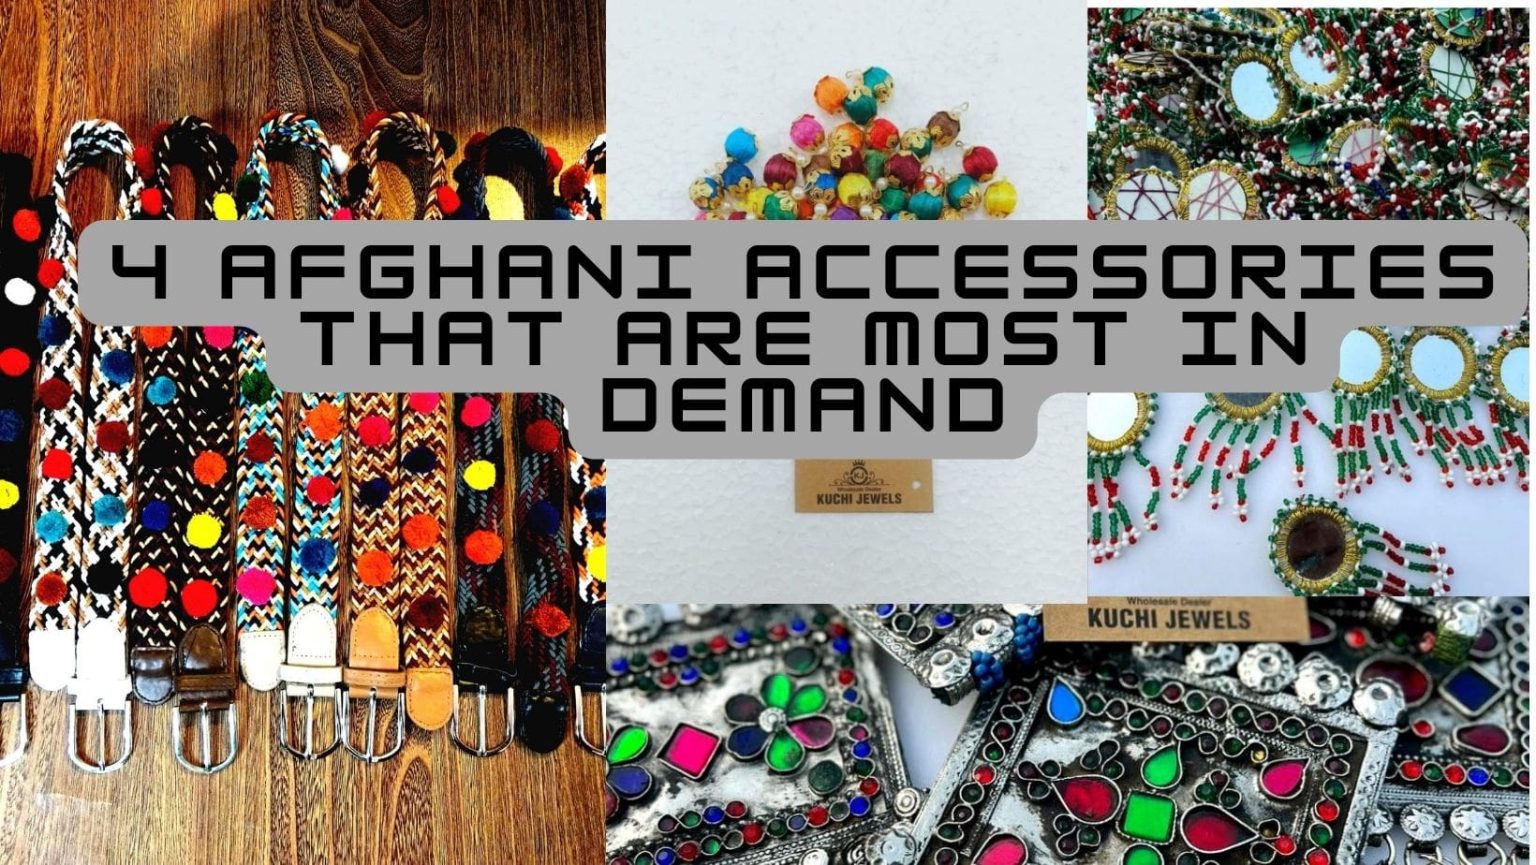 4-Afghani-Accessories-That-Are-Most-In-Demand-min-1536x865